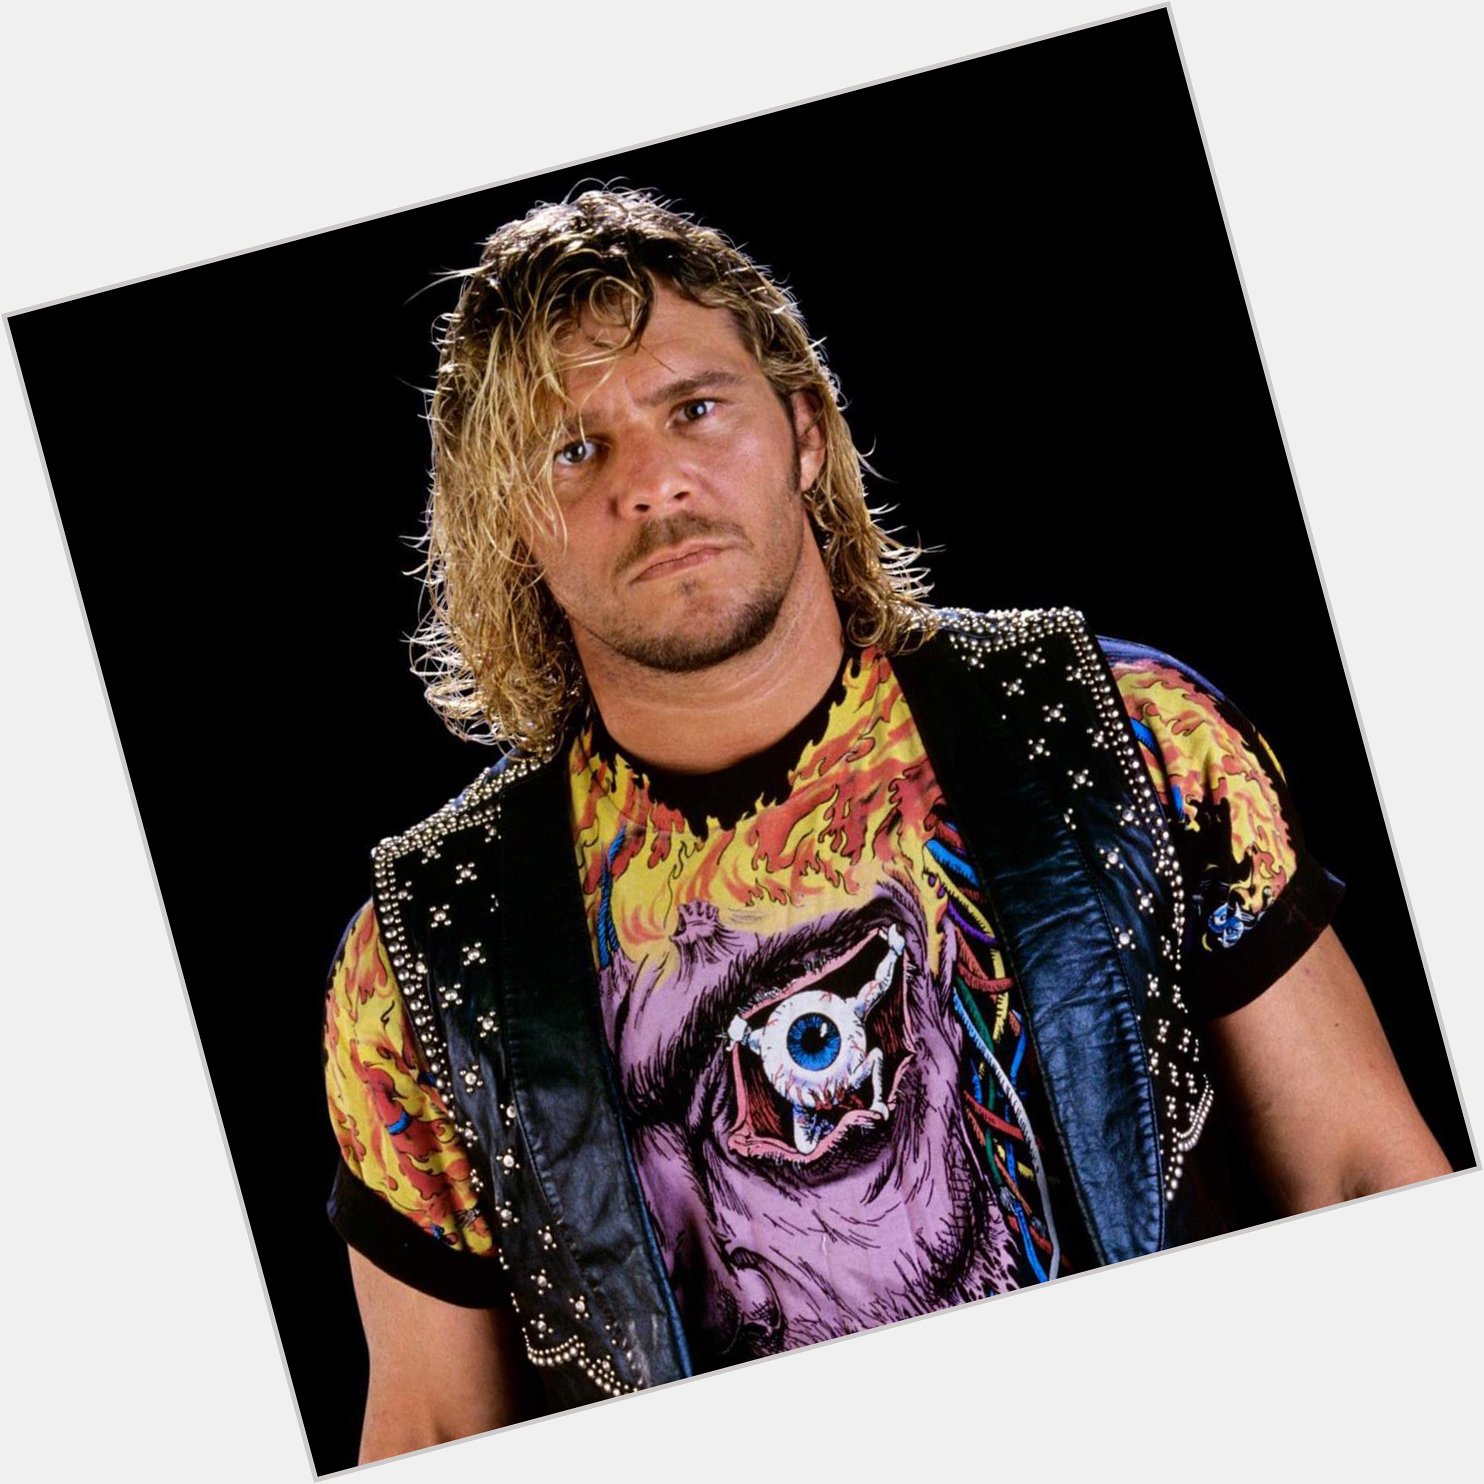 Happy Birthday to Brian Pillman! He would have turned 61 years old. 